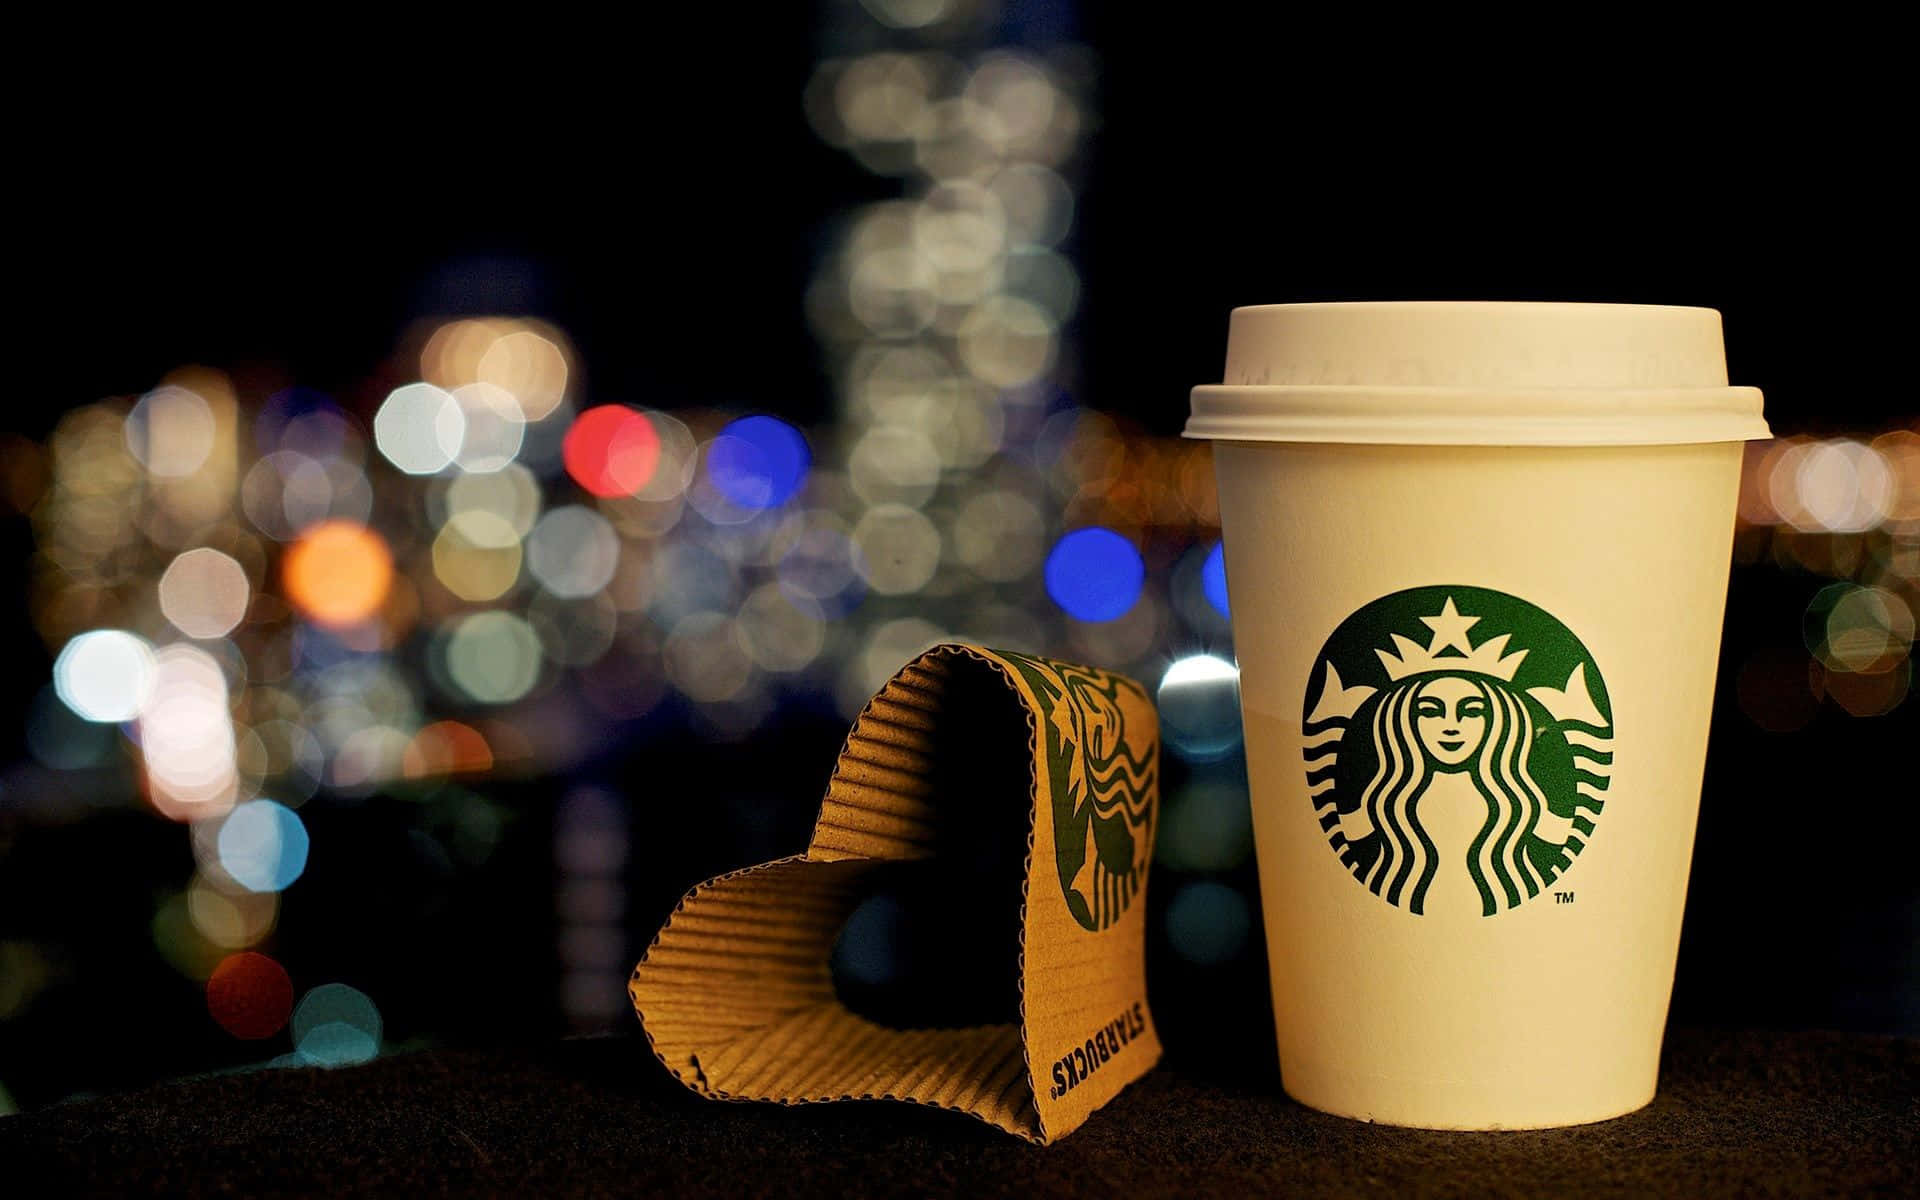 Enjoy your favorite Starbucks drinks with friends